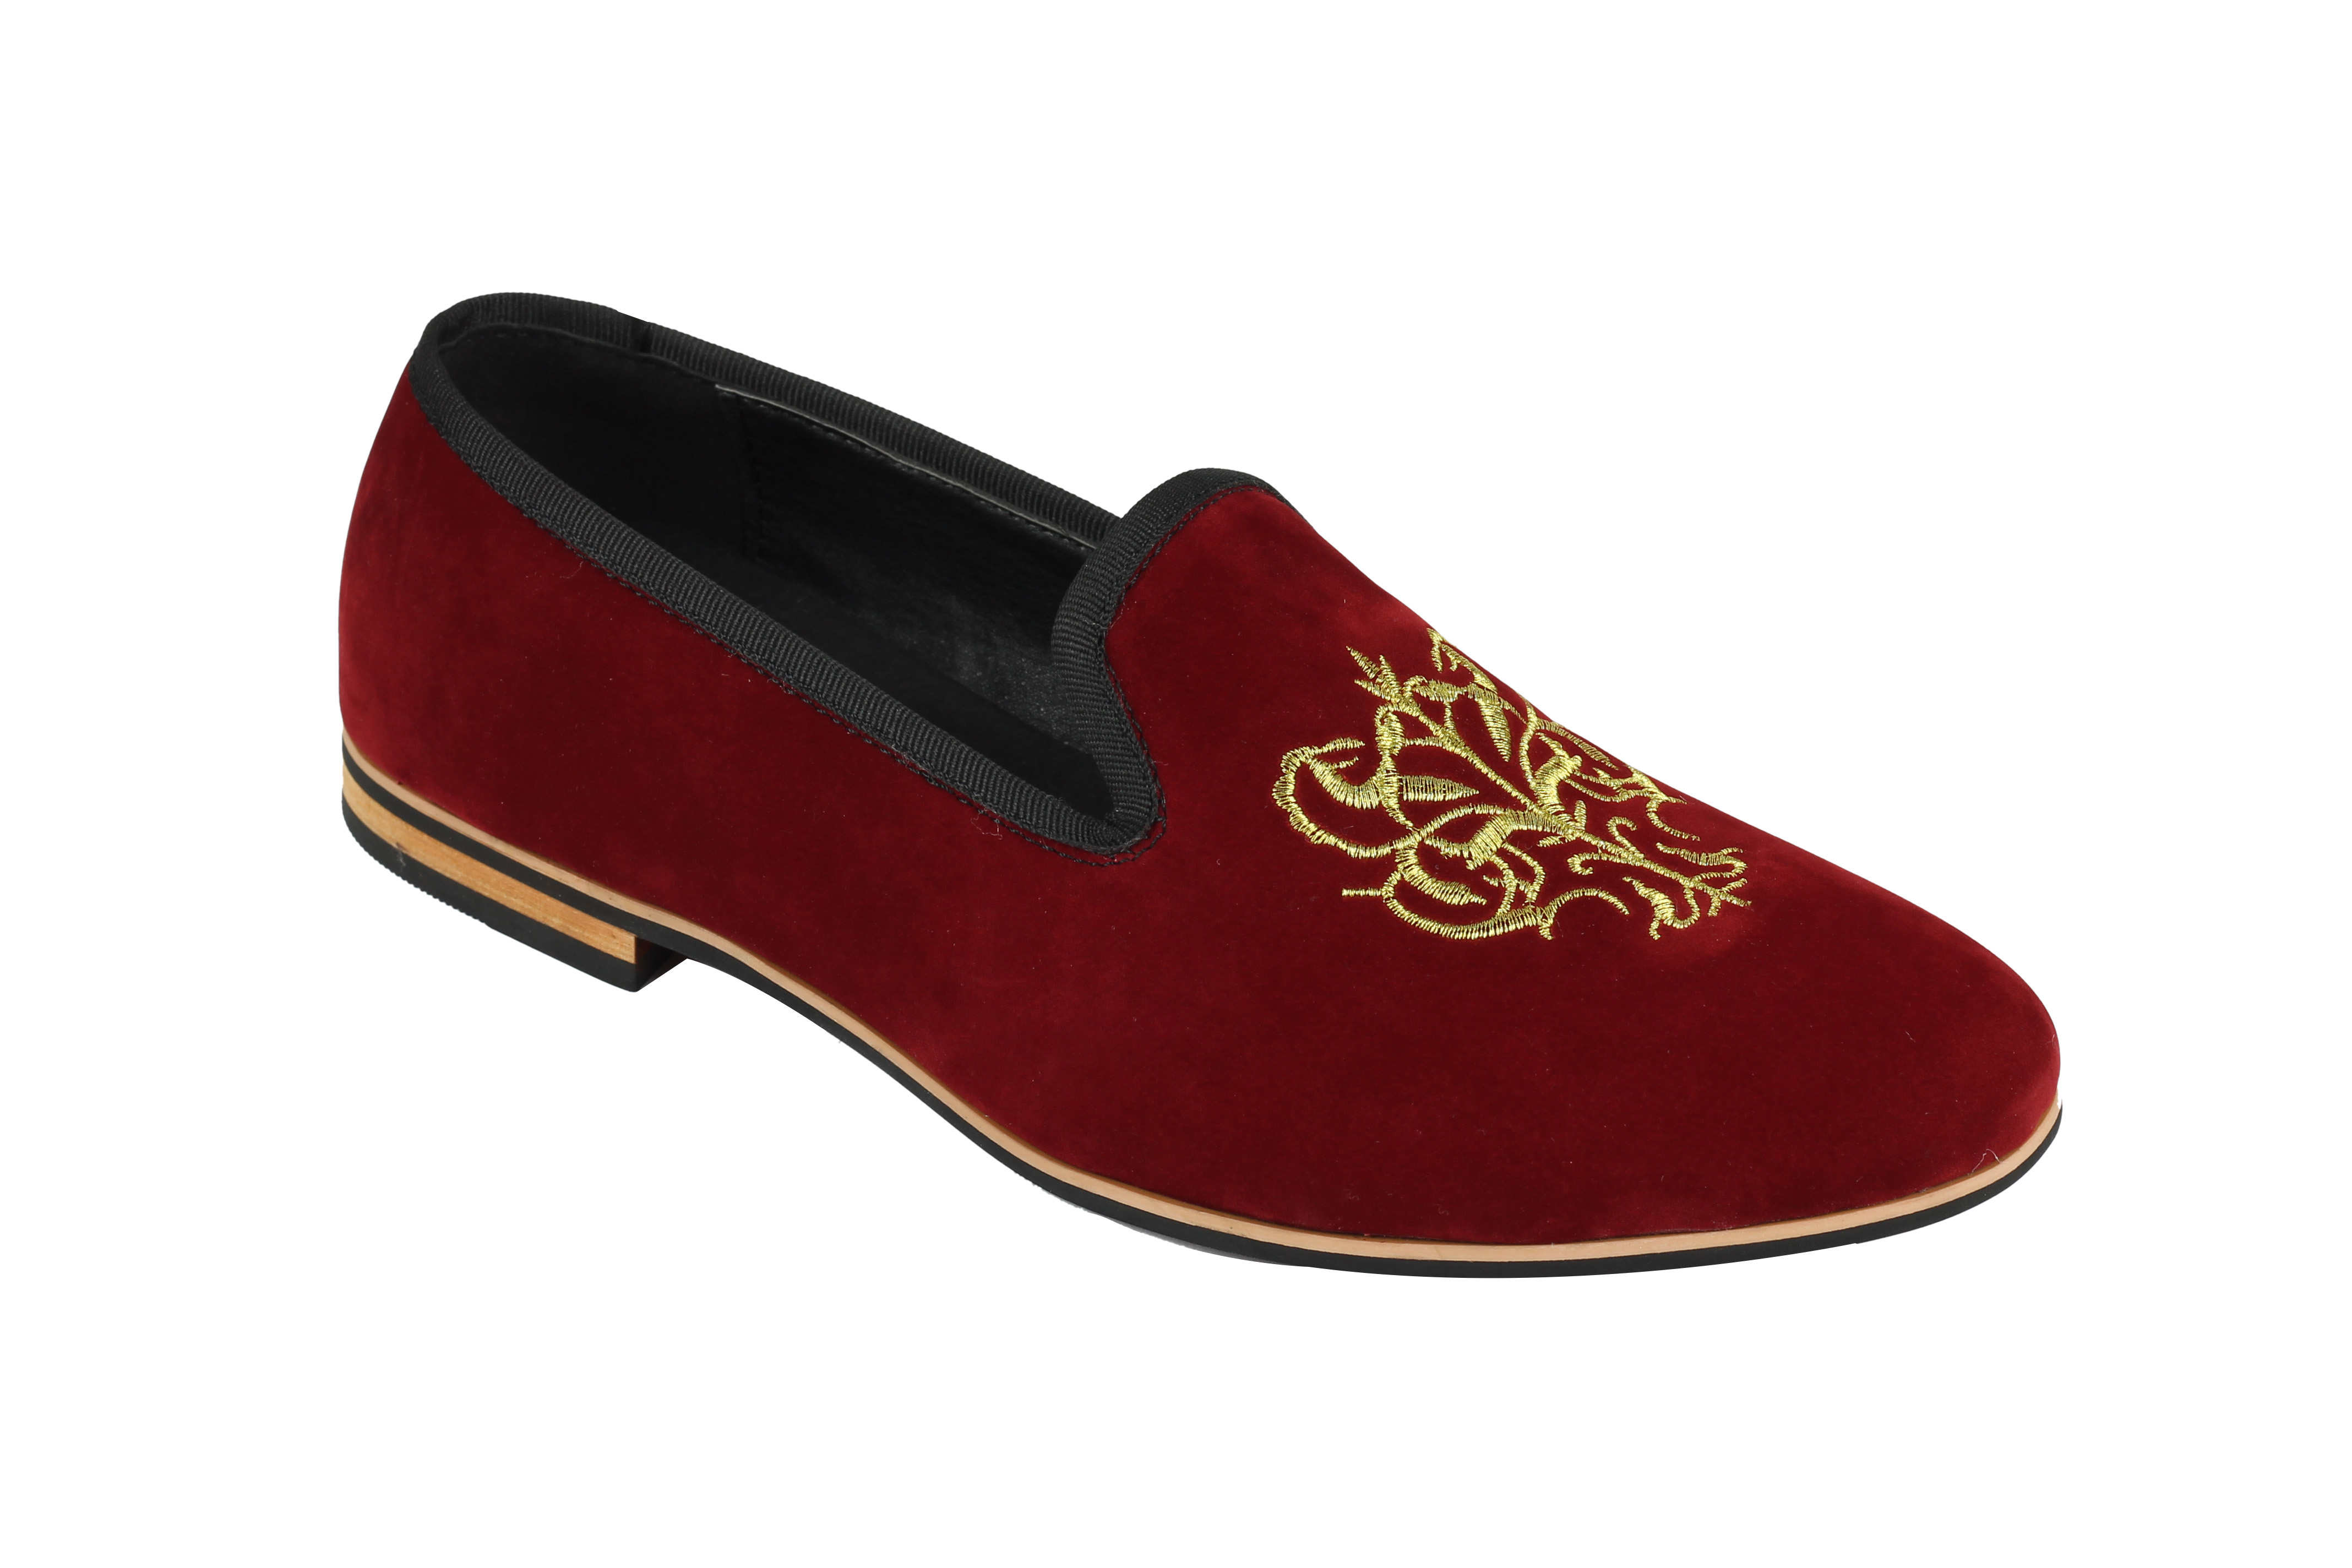 British Fashion Suede Embroidered Leather Shoes Large Size Solid Colour  Louboutins Career Formal Office Loafers PX035